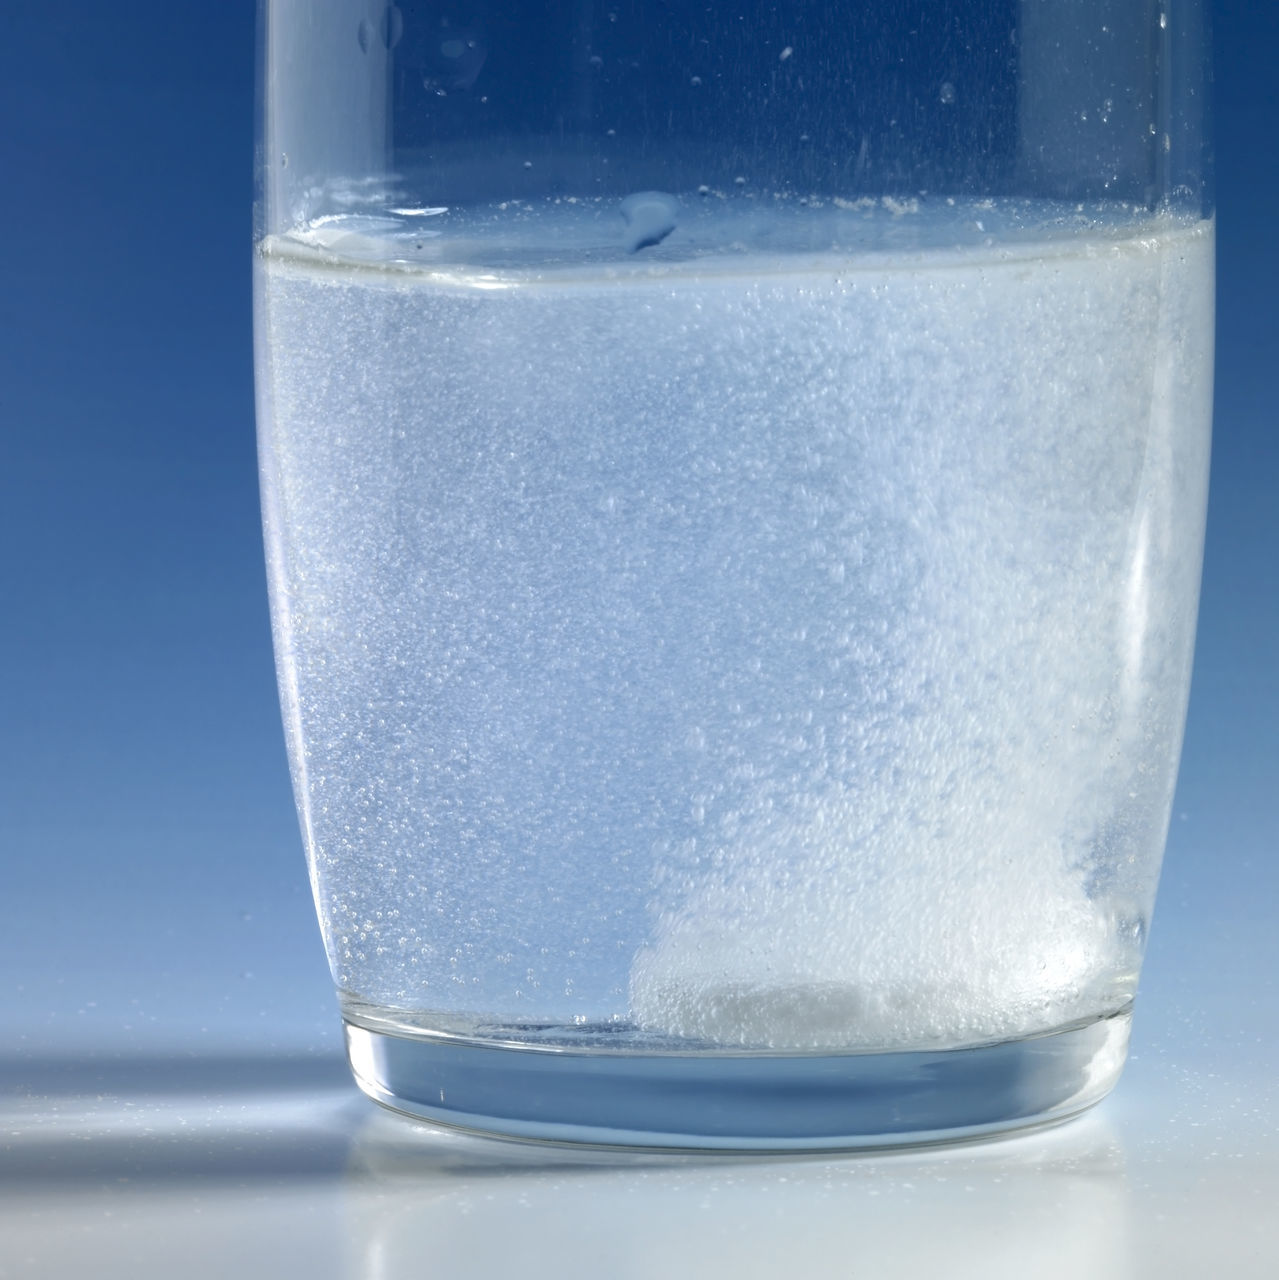 CLOSE-UP OF DRINK IN GLASS AGAINST WATER AGAINST BLUE BACKGROUND